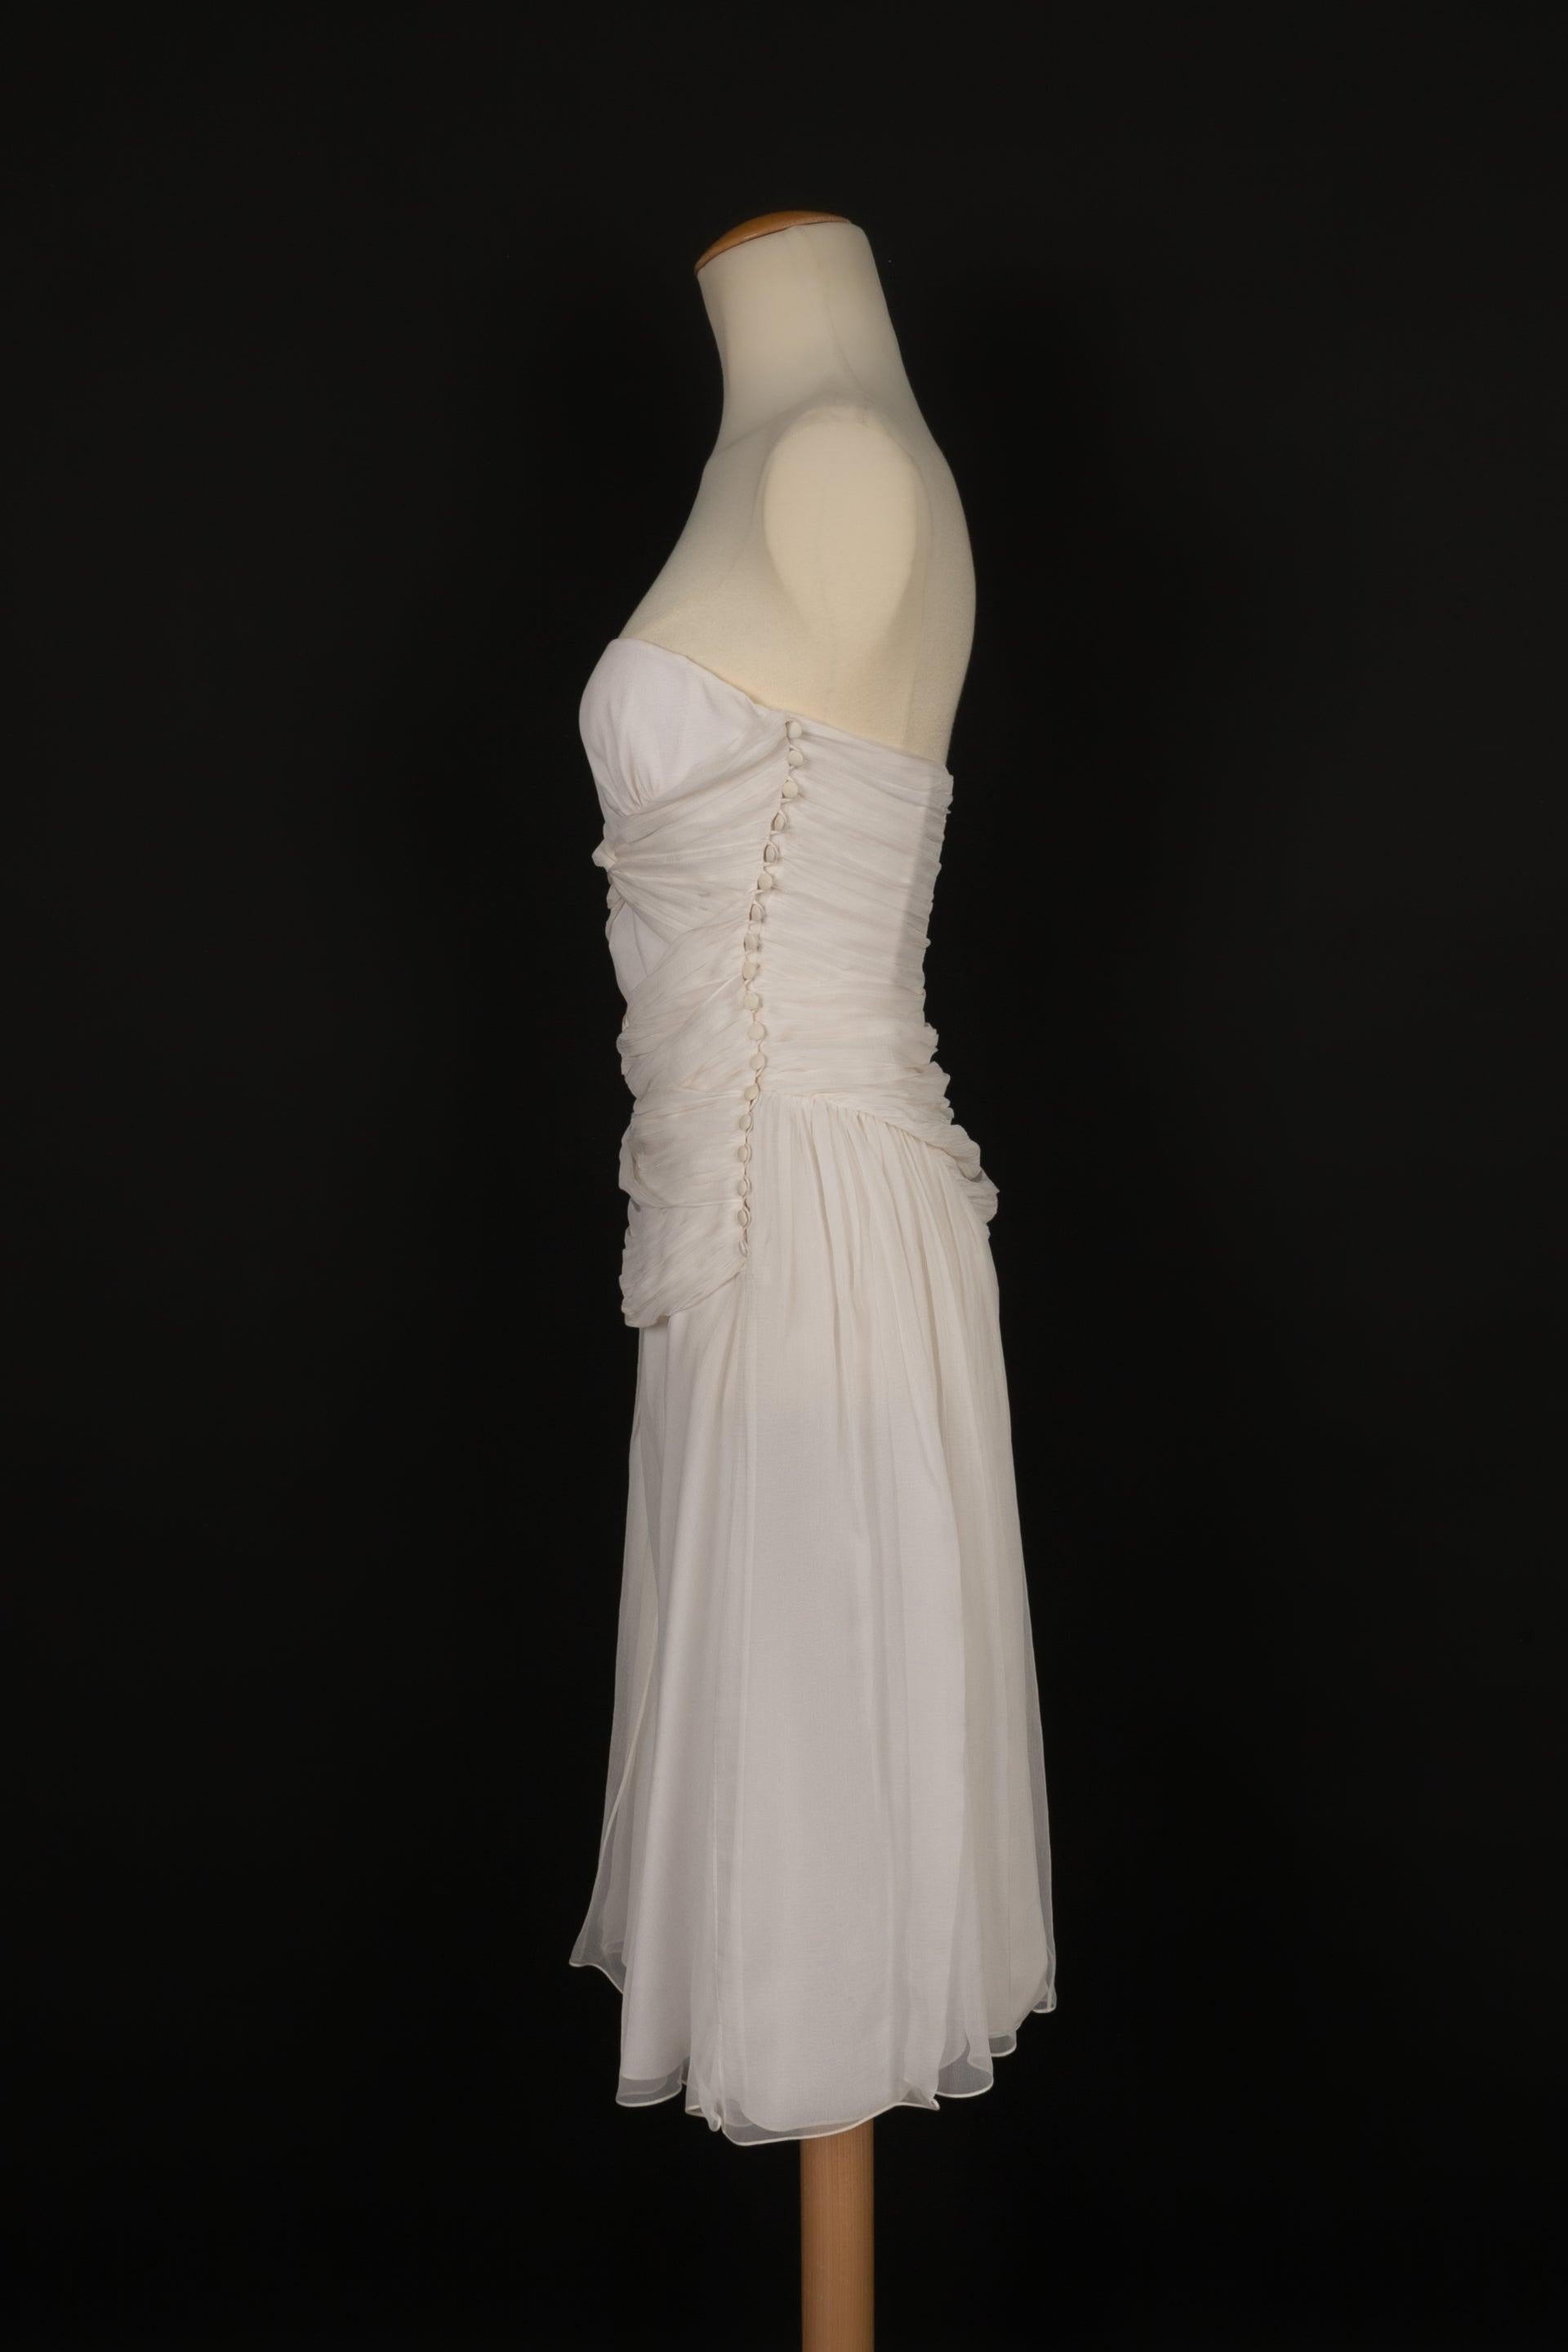 Galliano - (Made in France) Silk muslin bustier dress. Size 36FR.

Additional information:
Condition: Very good condition
Dimensions: Chest: 36 cm
Length: 85 cm

Seller reference: VR276
